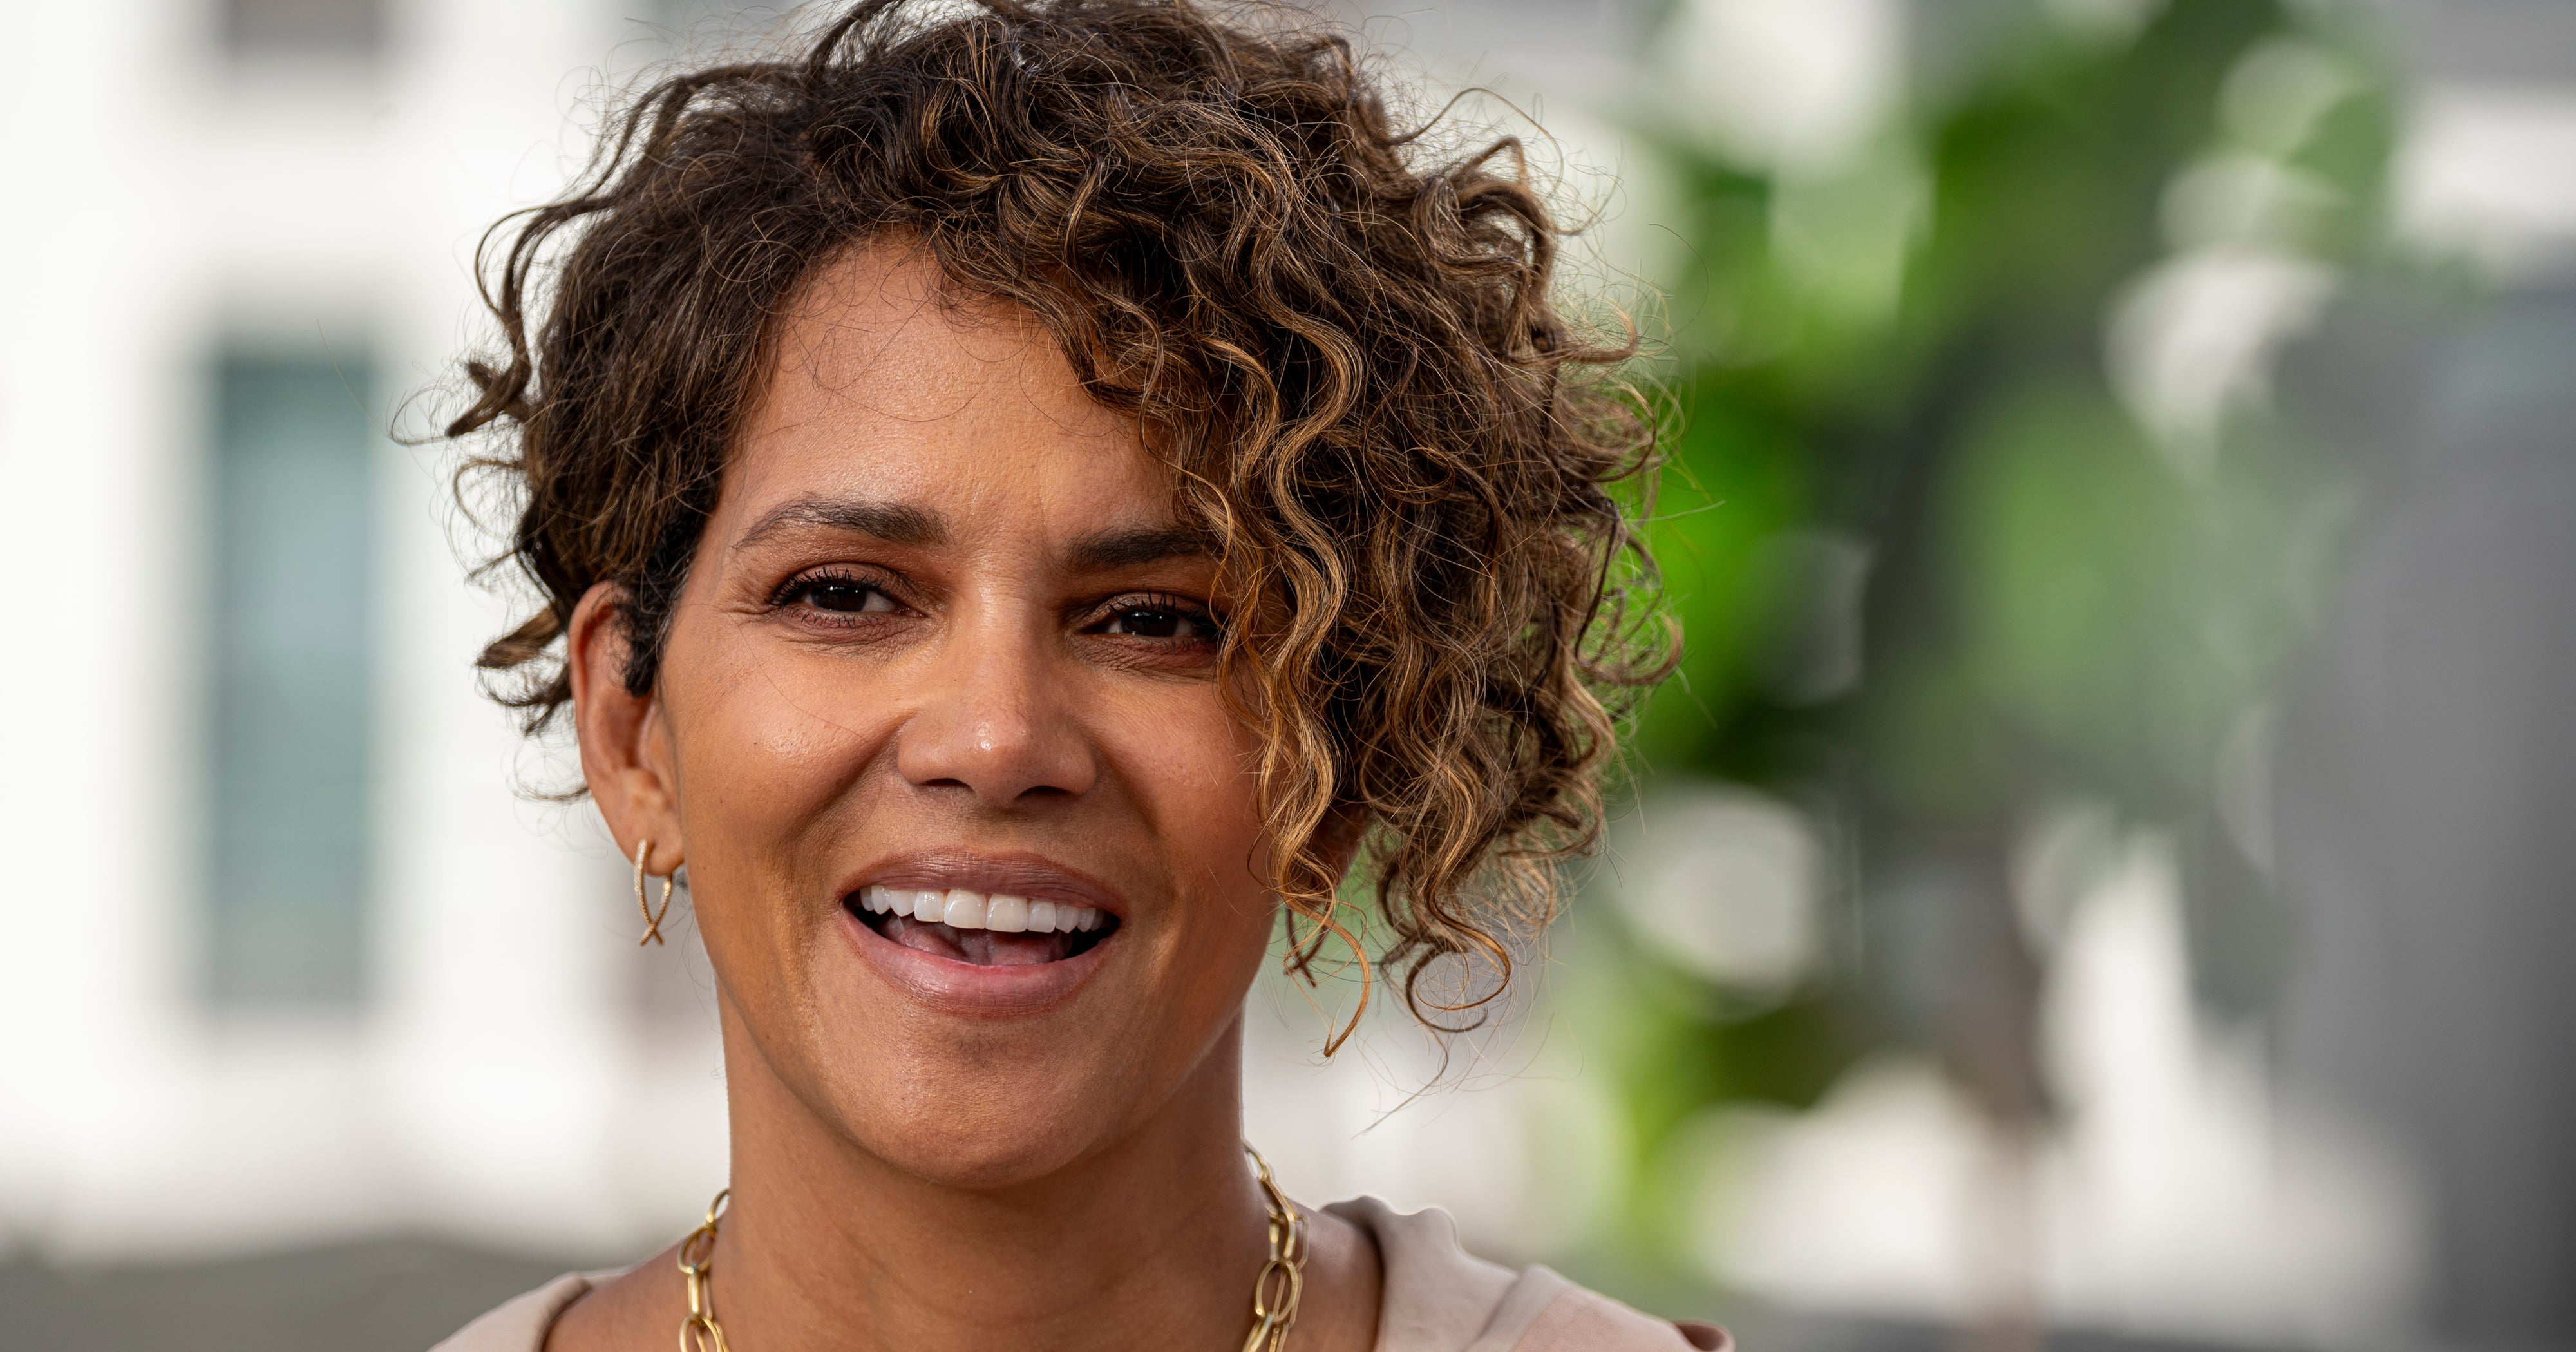 Halle Berry Is Embracing Aging and Menopause: “I Am Challenging Everything”